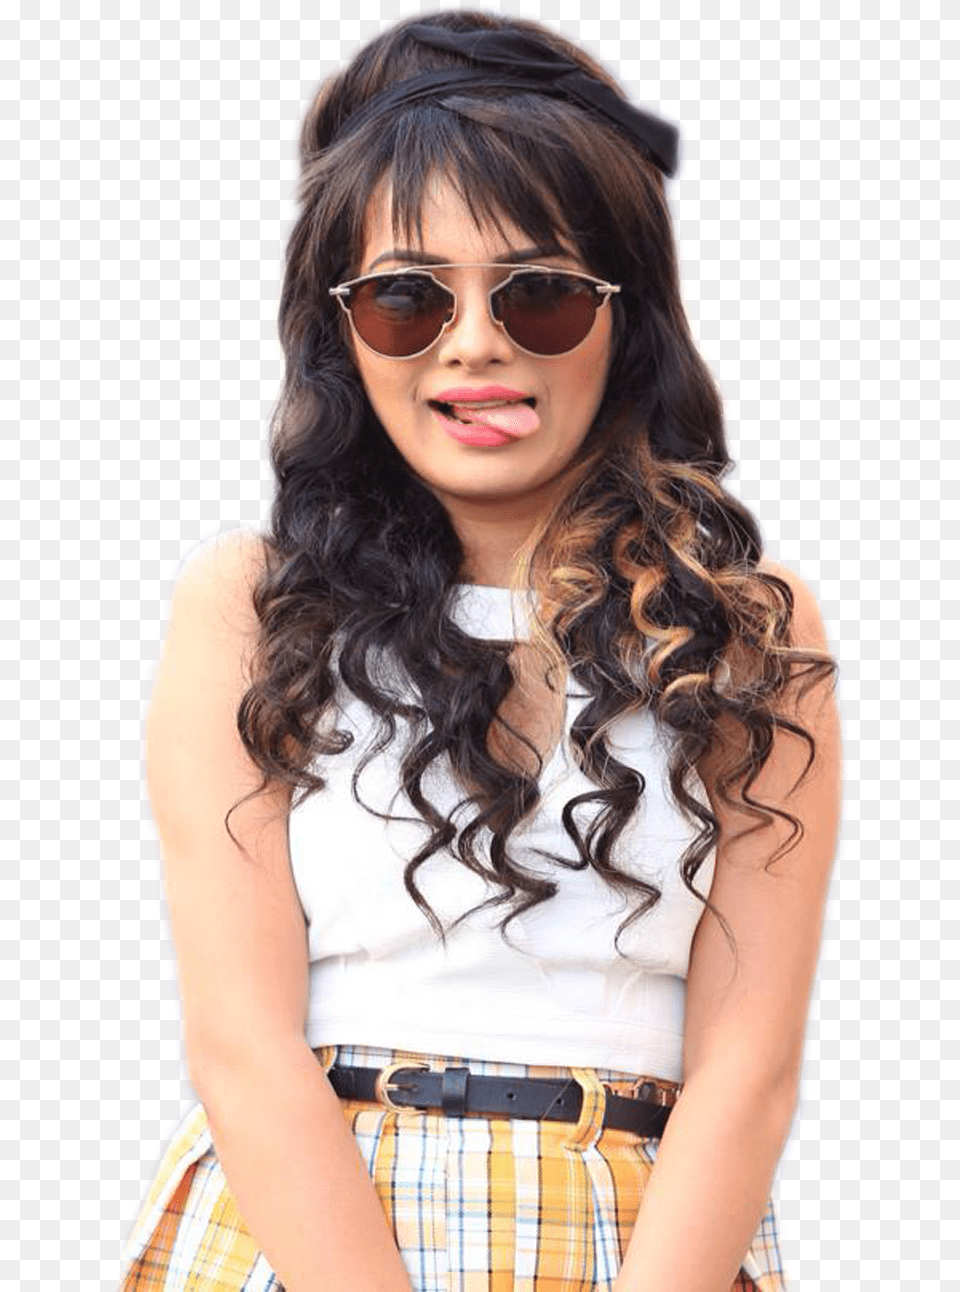 Images Girl Hd All, Accessories, Sunglasses, Portrait, Photography Free Transparent Png